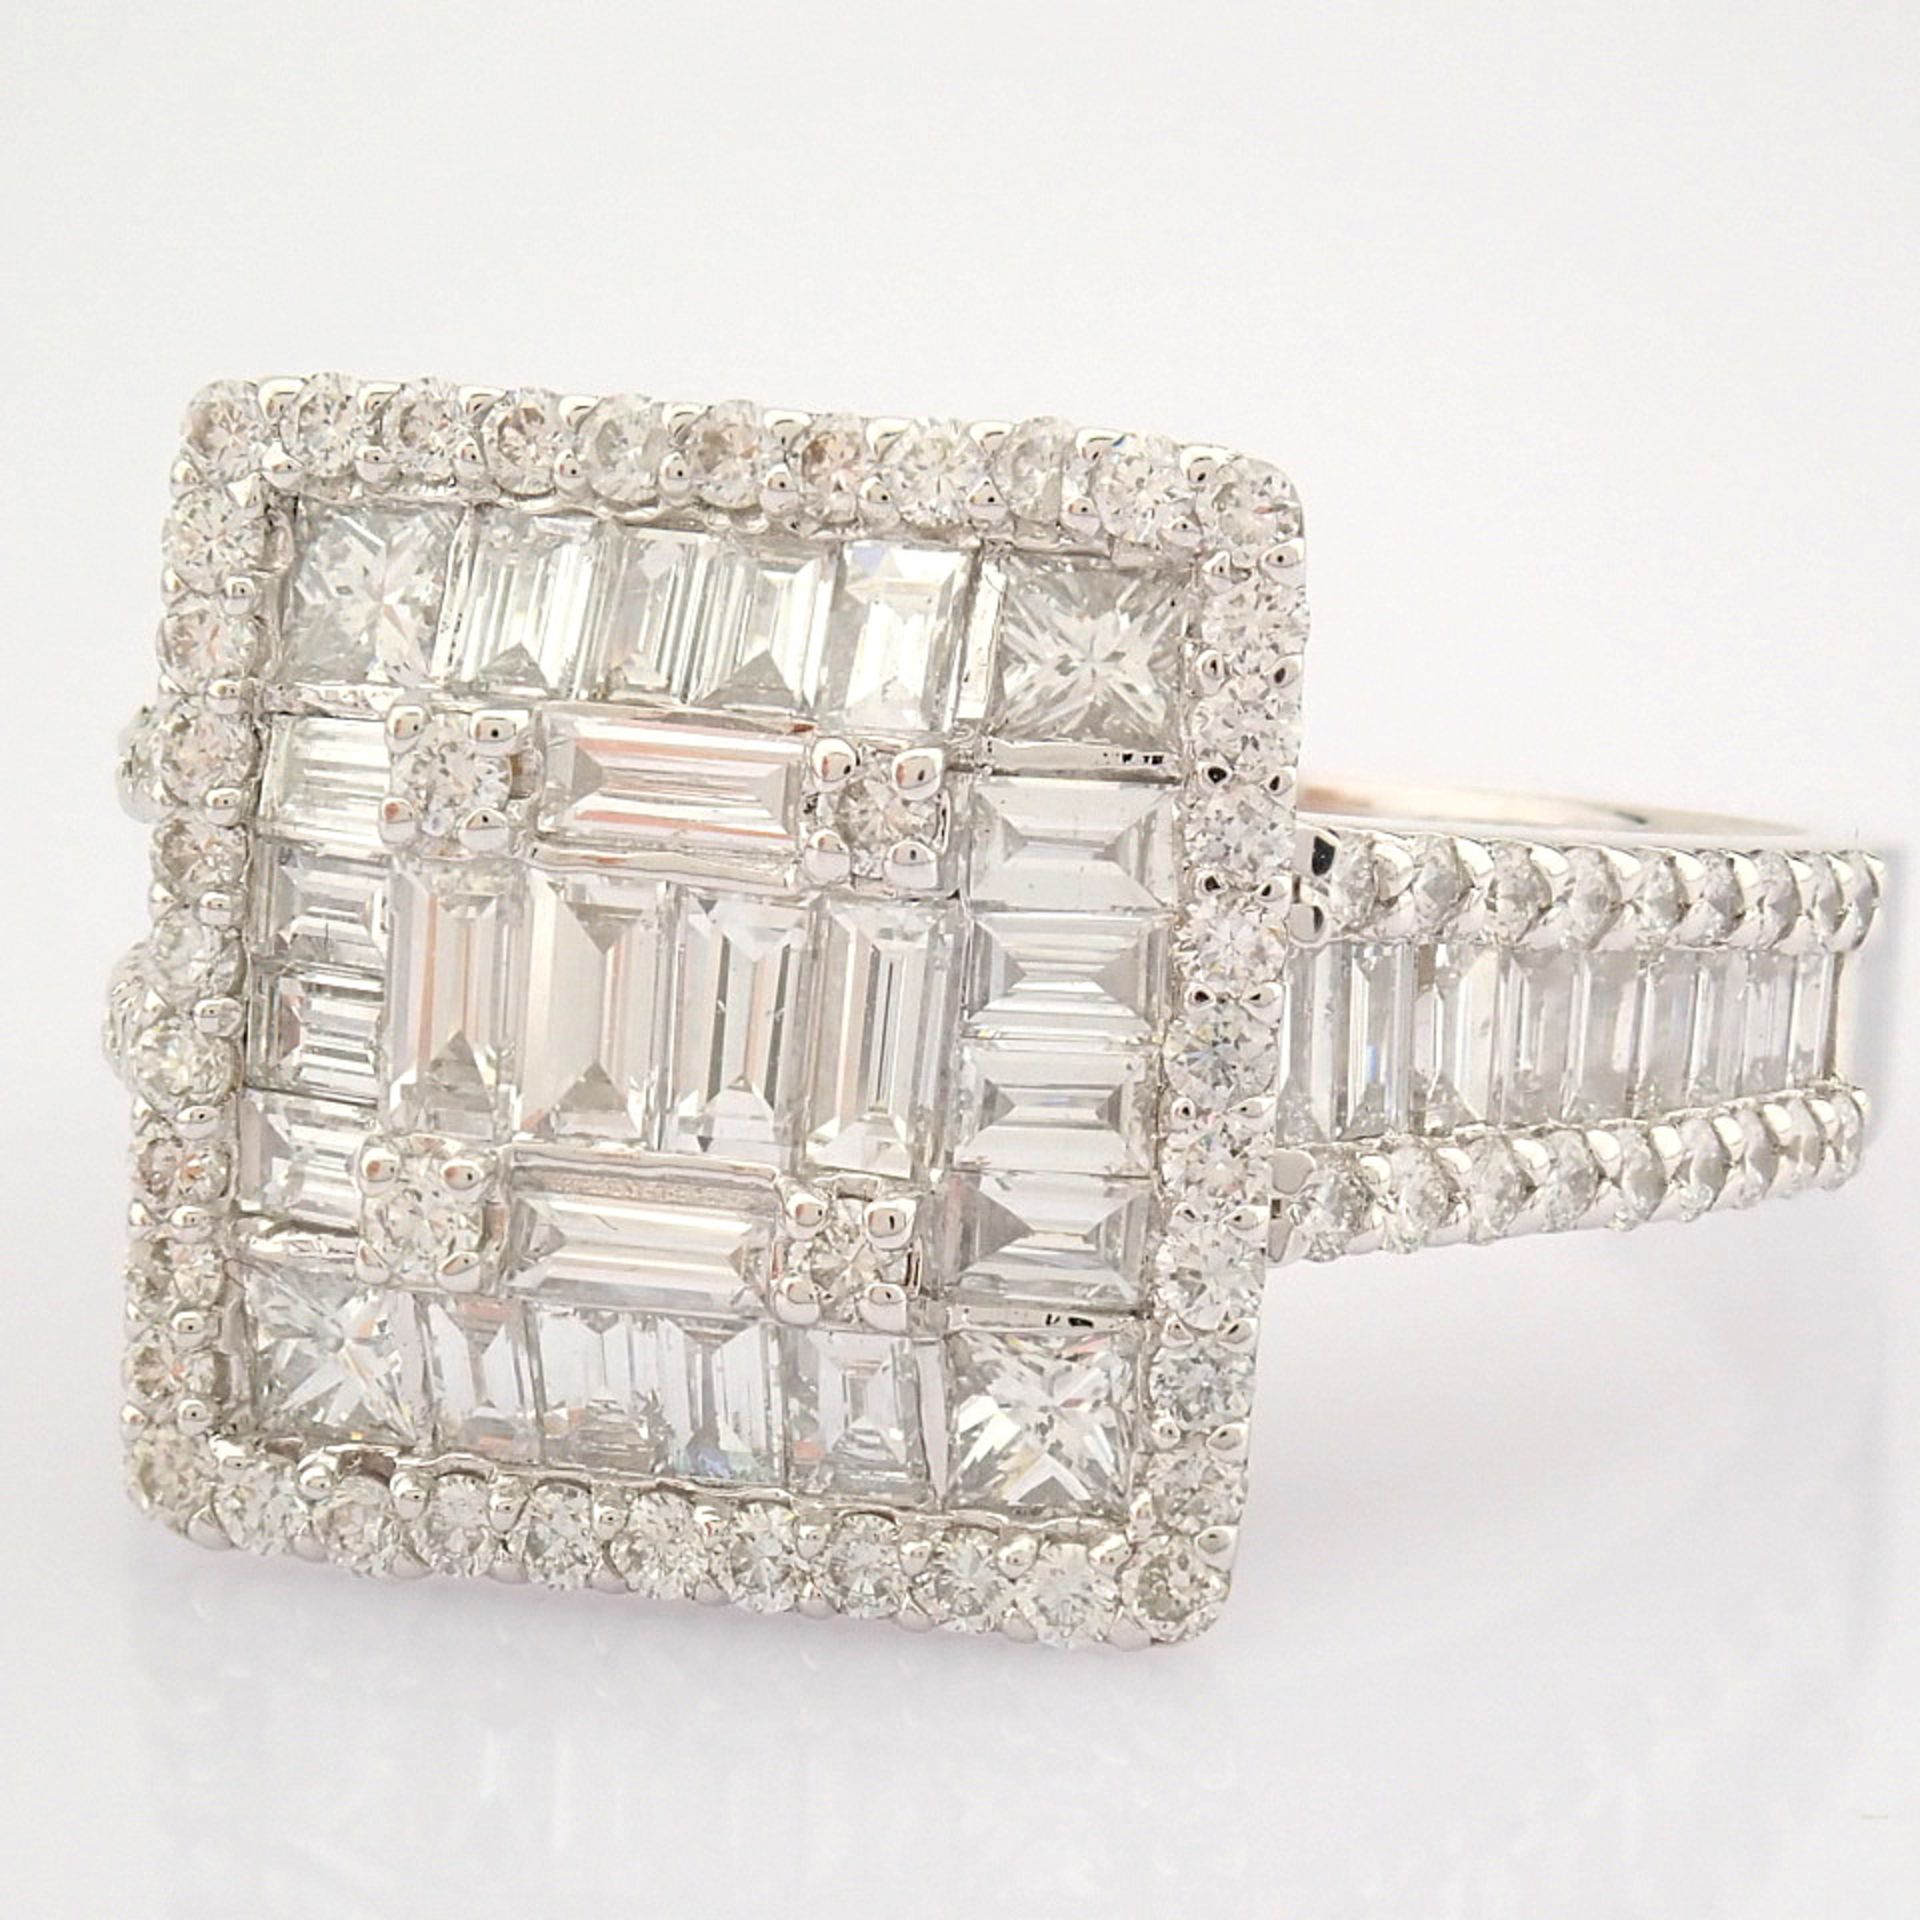 Certificated 14K White Gold Baguette Diamond & Diamond Ring (Total 1.38 ct Stone) - Image 7 of 12